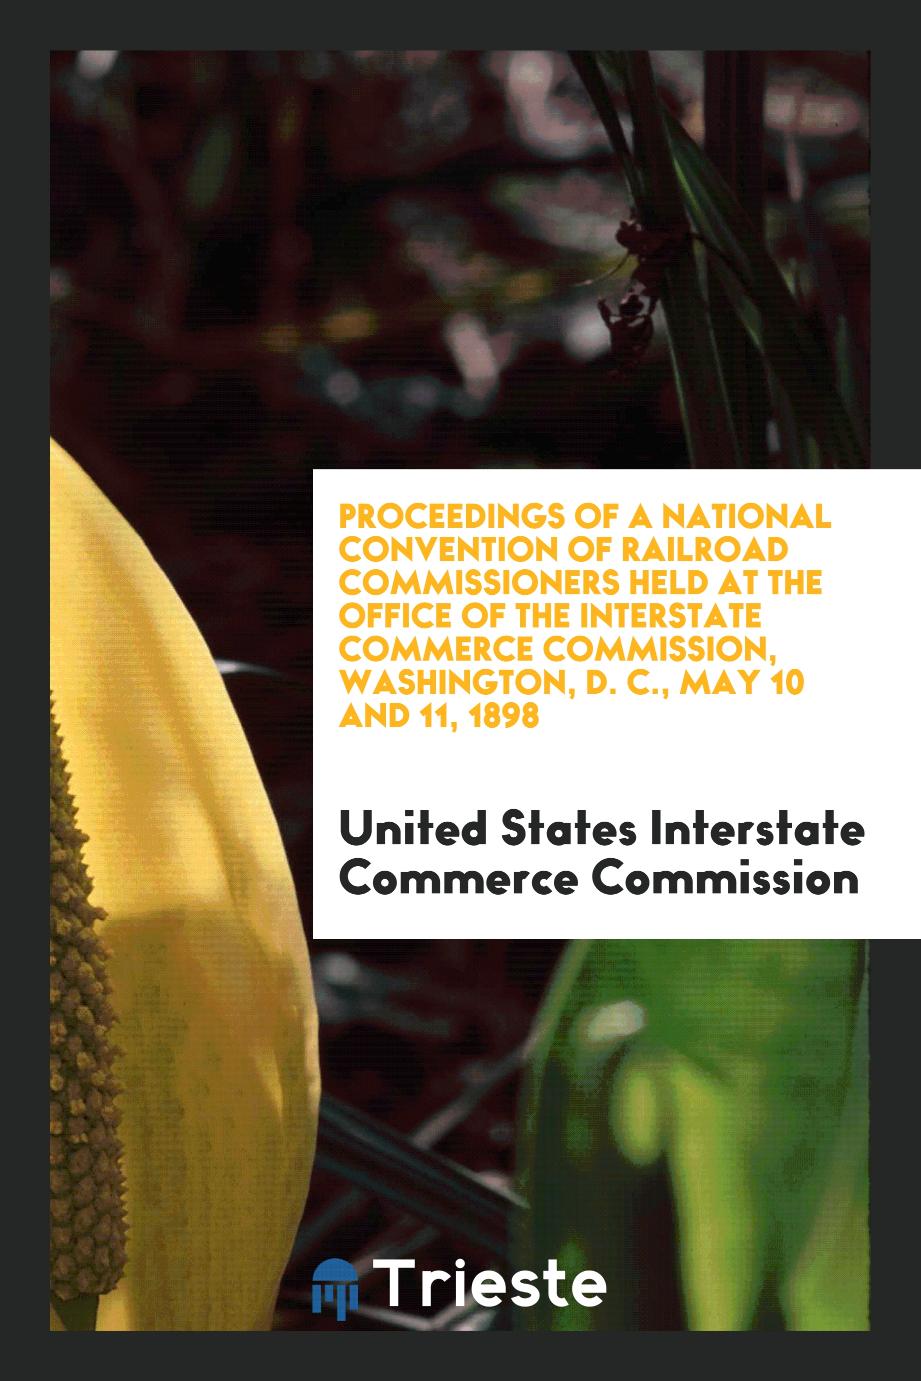 Proceedings of a National Convention of Railroad Commissioners Held at the Office of The Interstate Commerce Commission, Washington, D. C., May 10 and 11, 1898